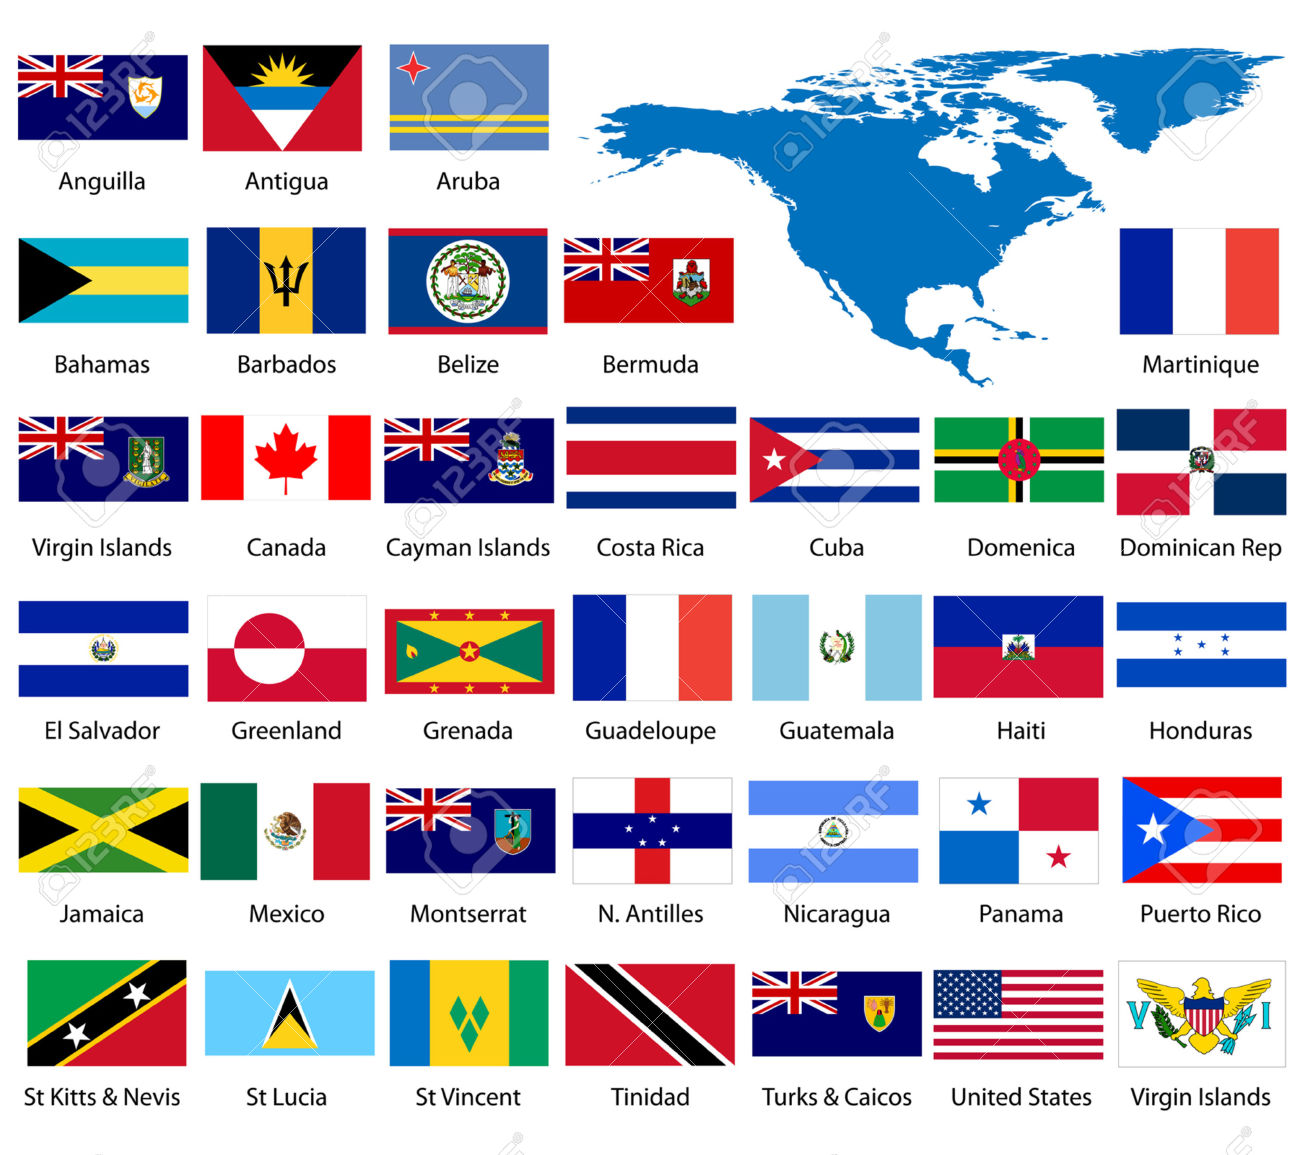 North American Flags